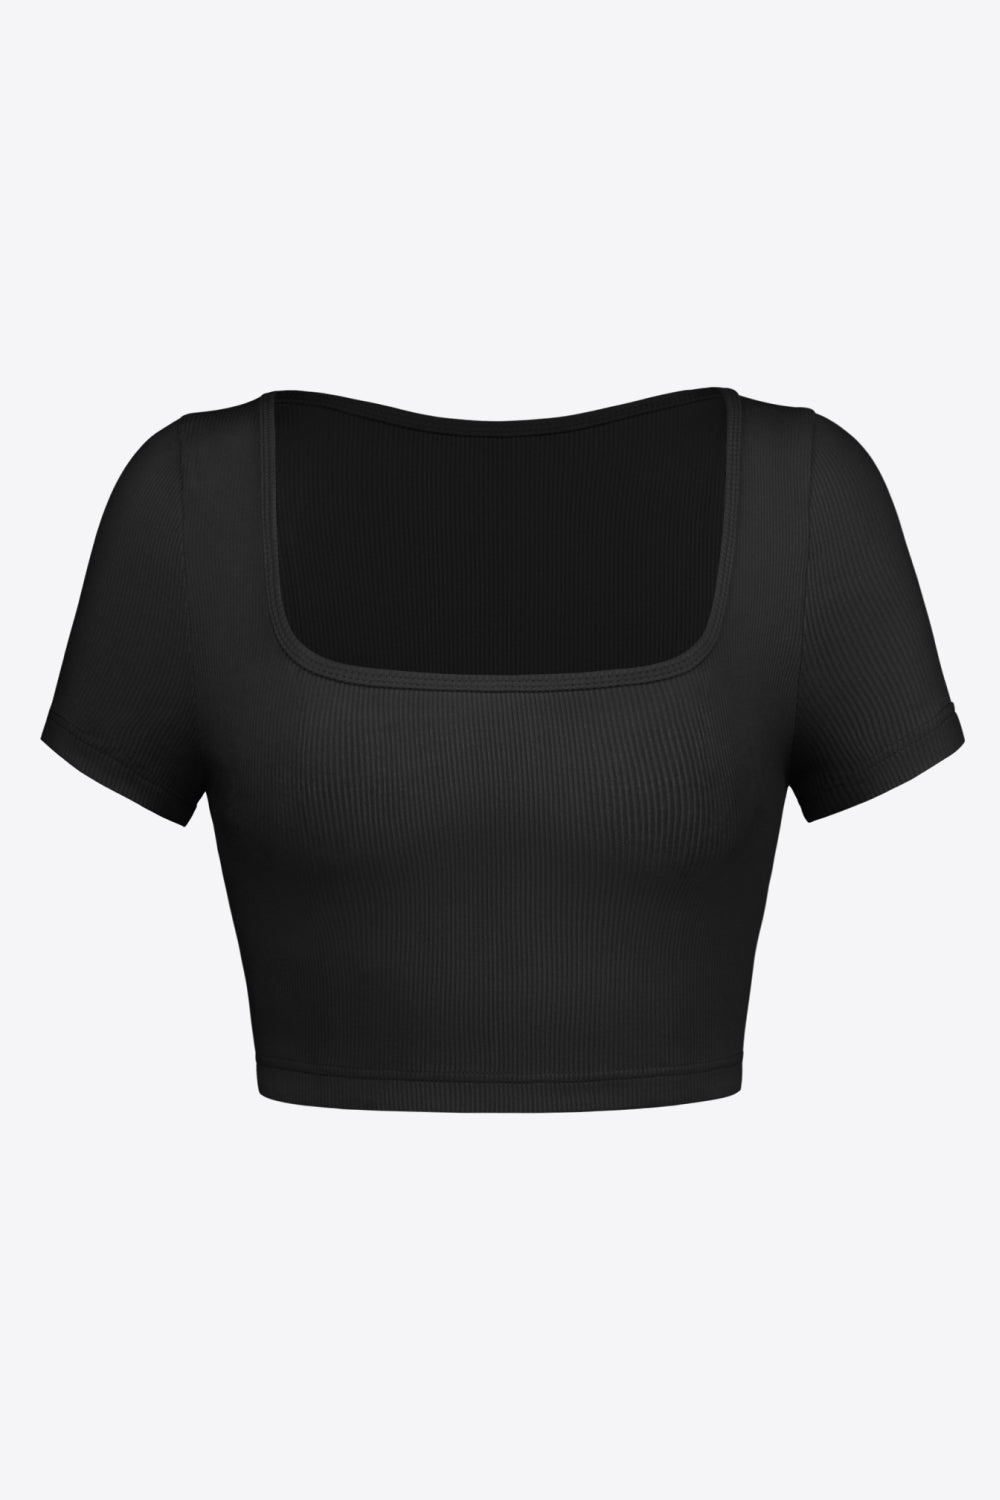 Square Neck Ribbed Crop Top Print on any thing USA/STOD clothes